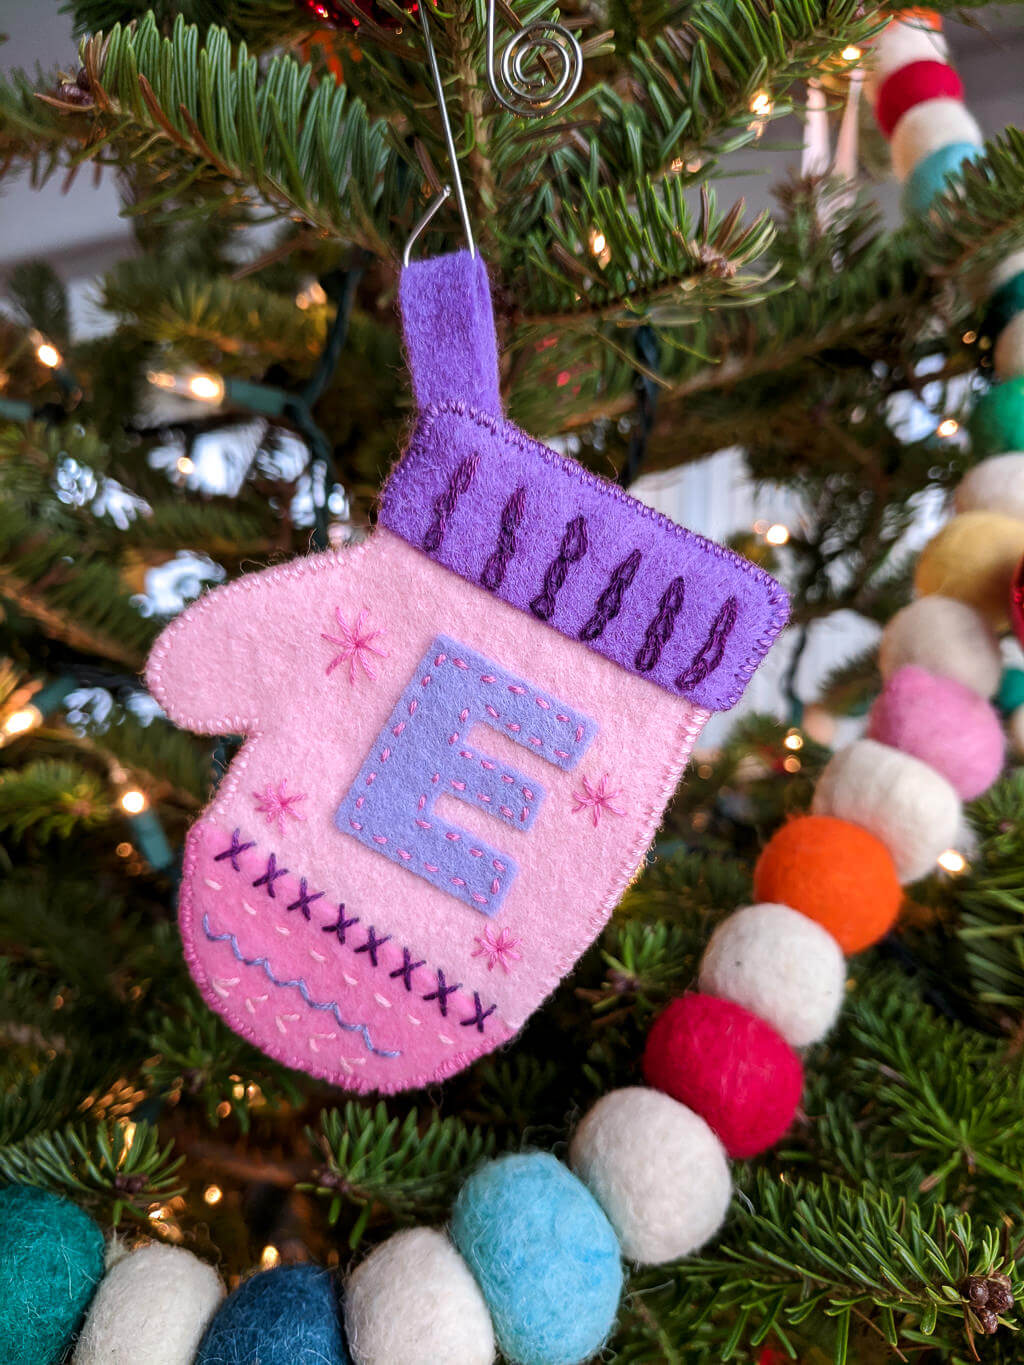 DIY monogrammed mitten ornament on a Christmas tree